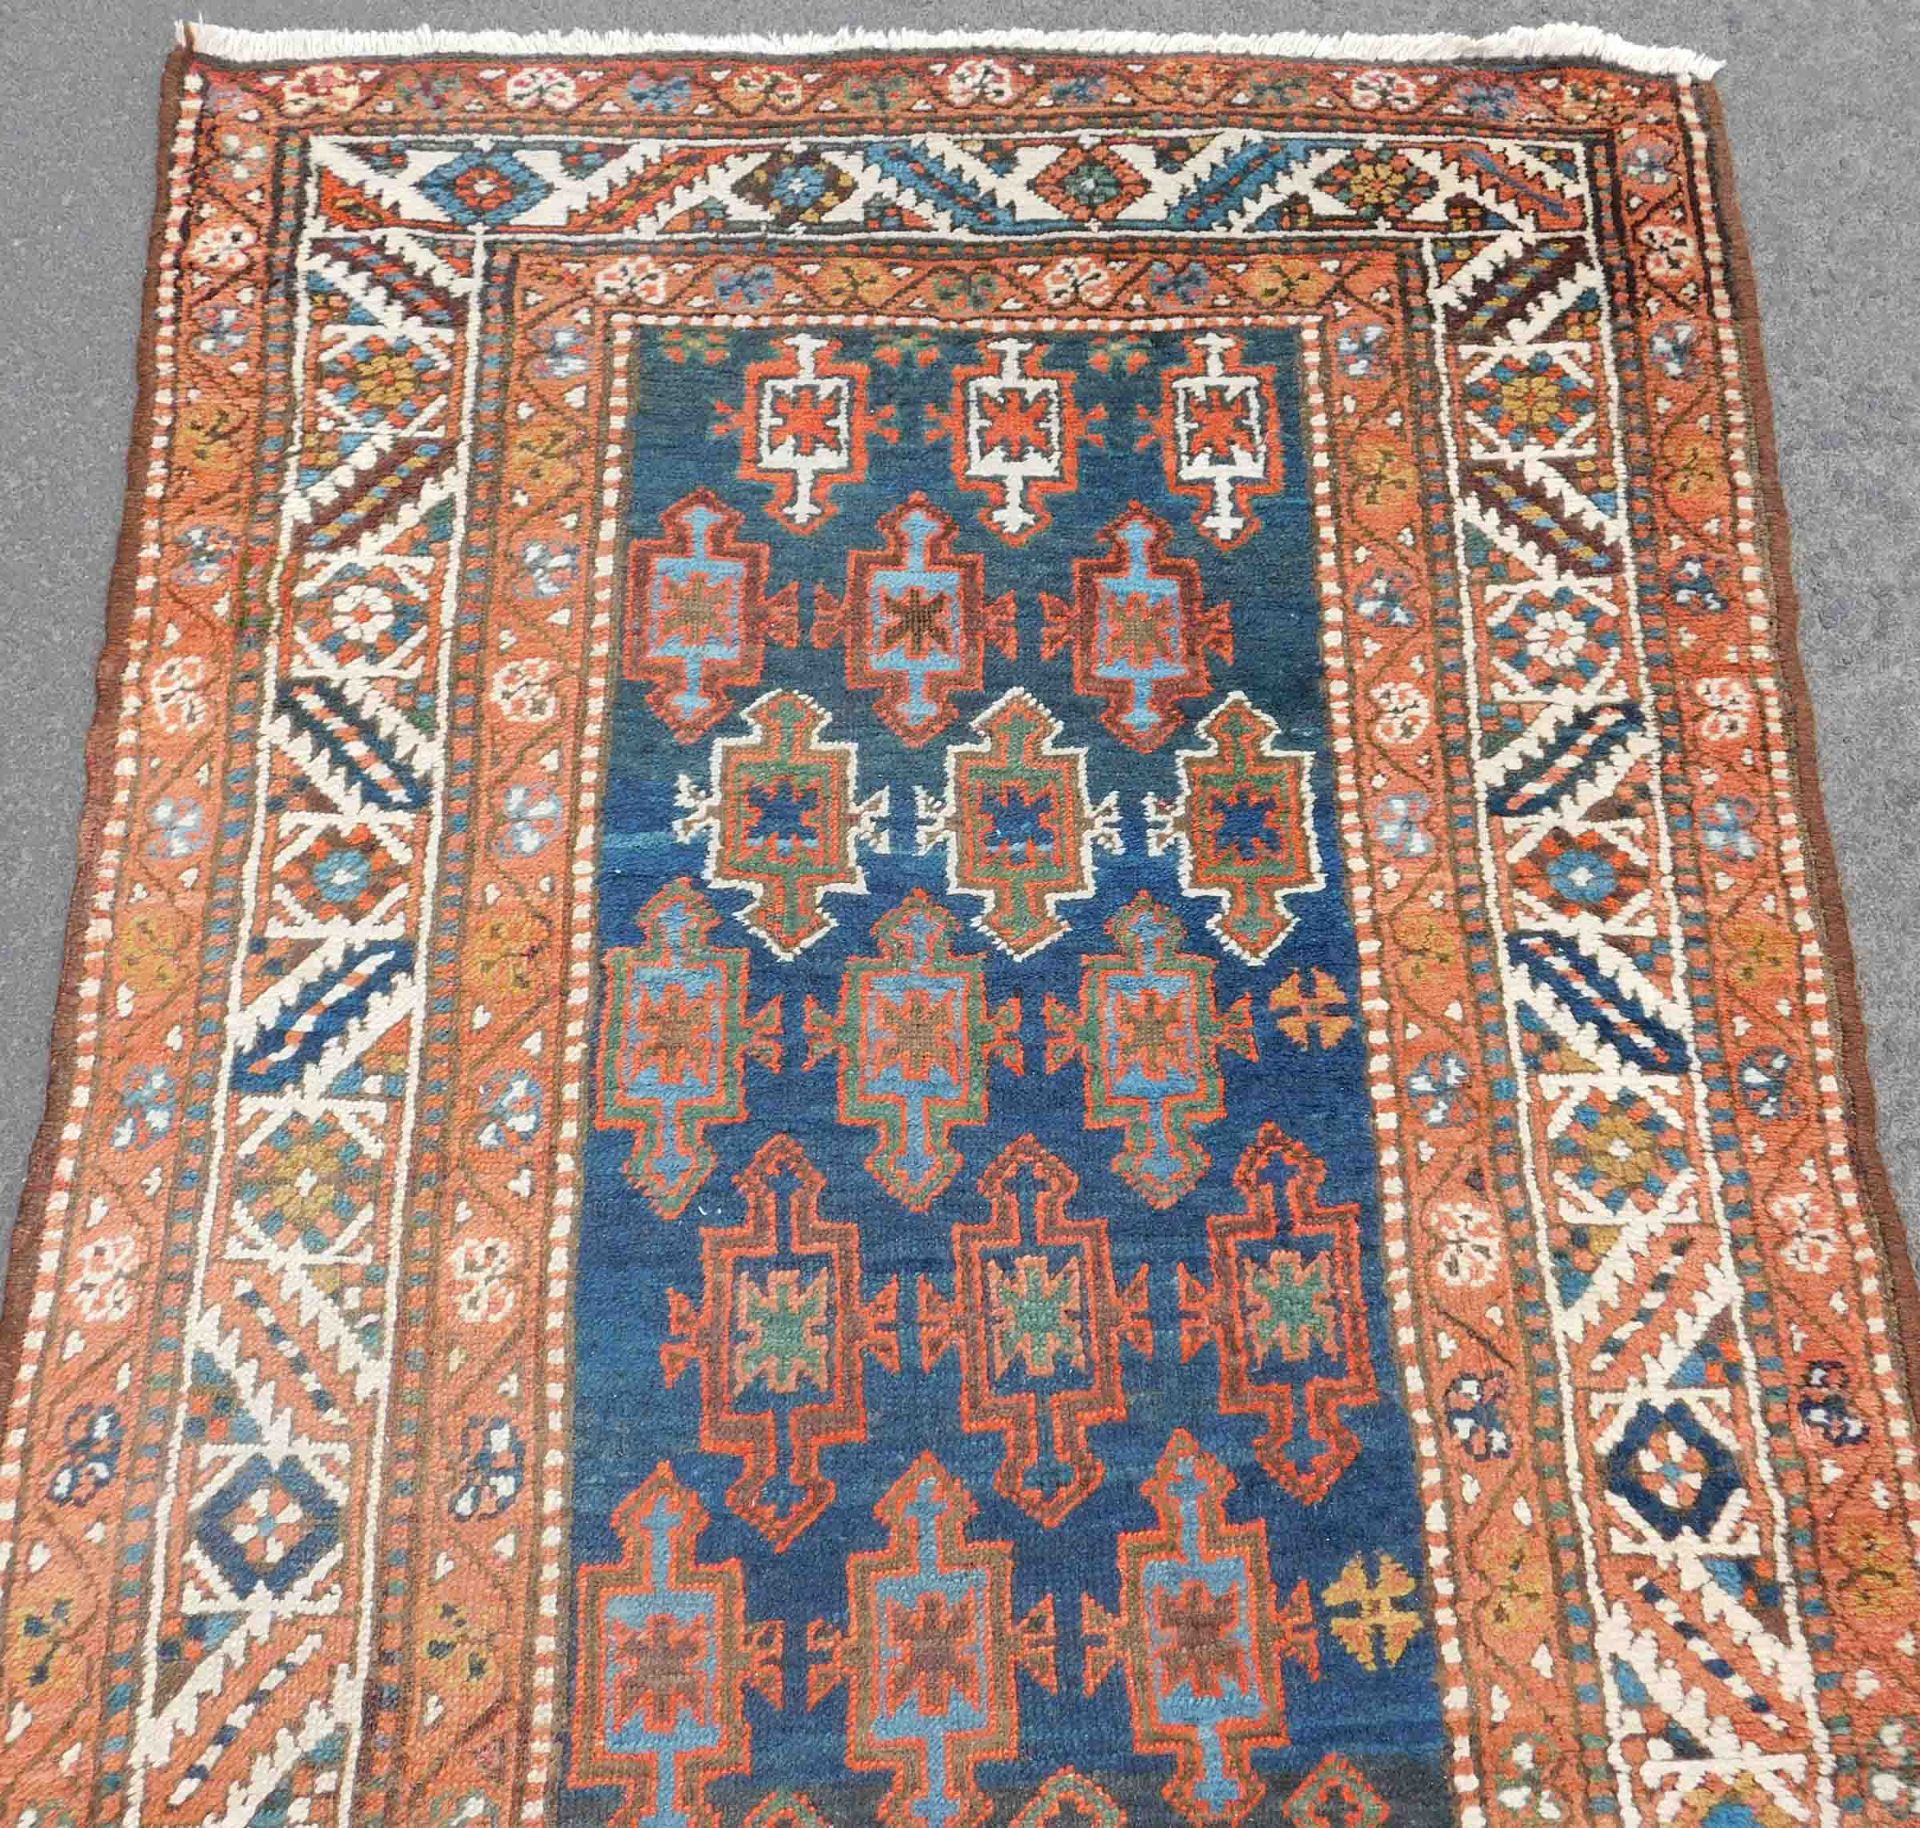 Heriz Persian rug. Runner. Iran. Antique, around 1912-1913.Knotted by hand. Wool on wool. Probably - Image 6 of 8